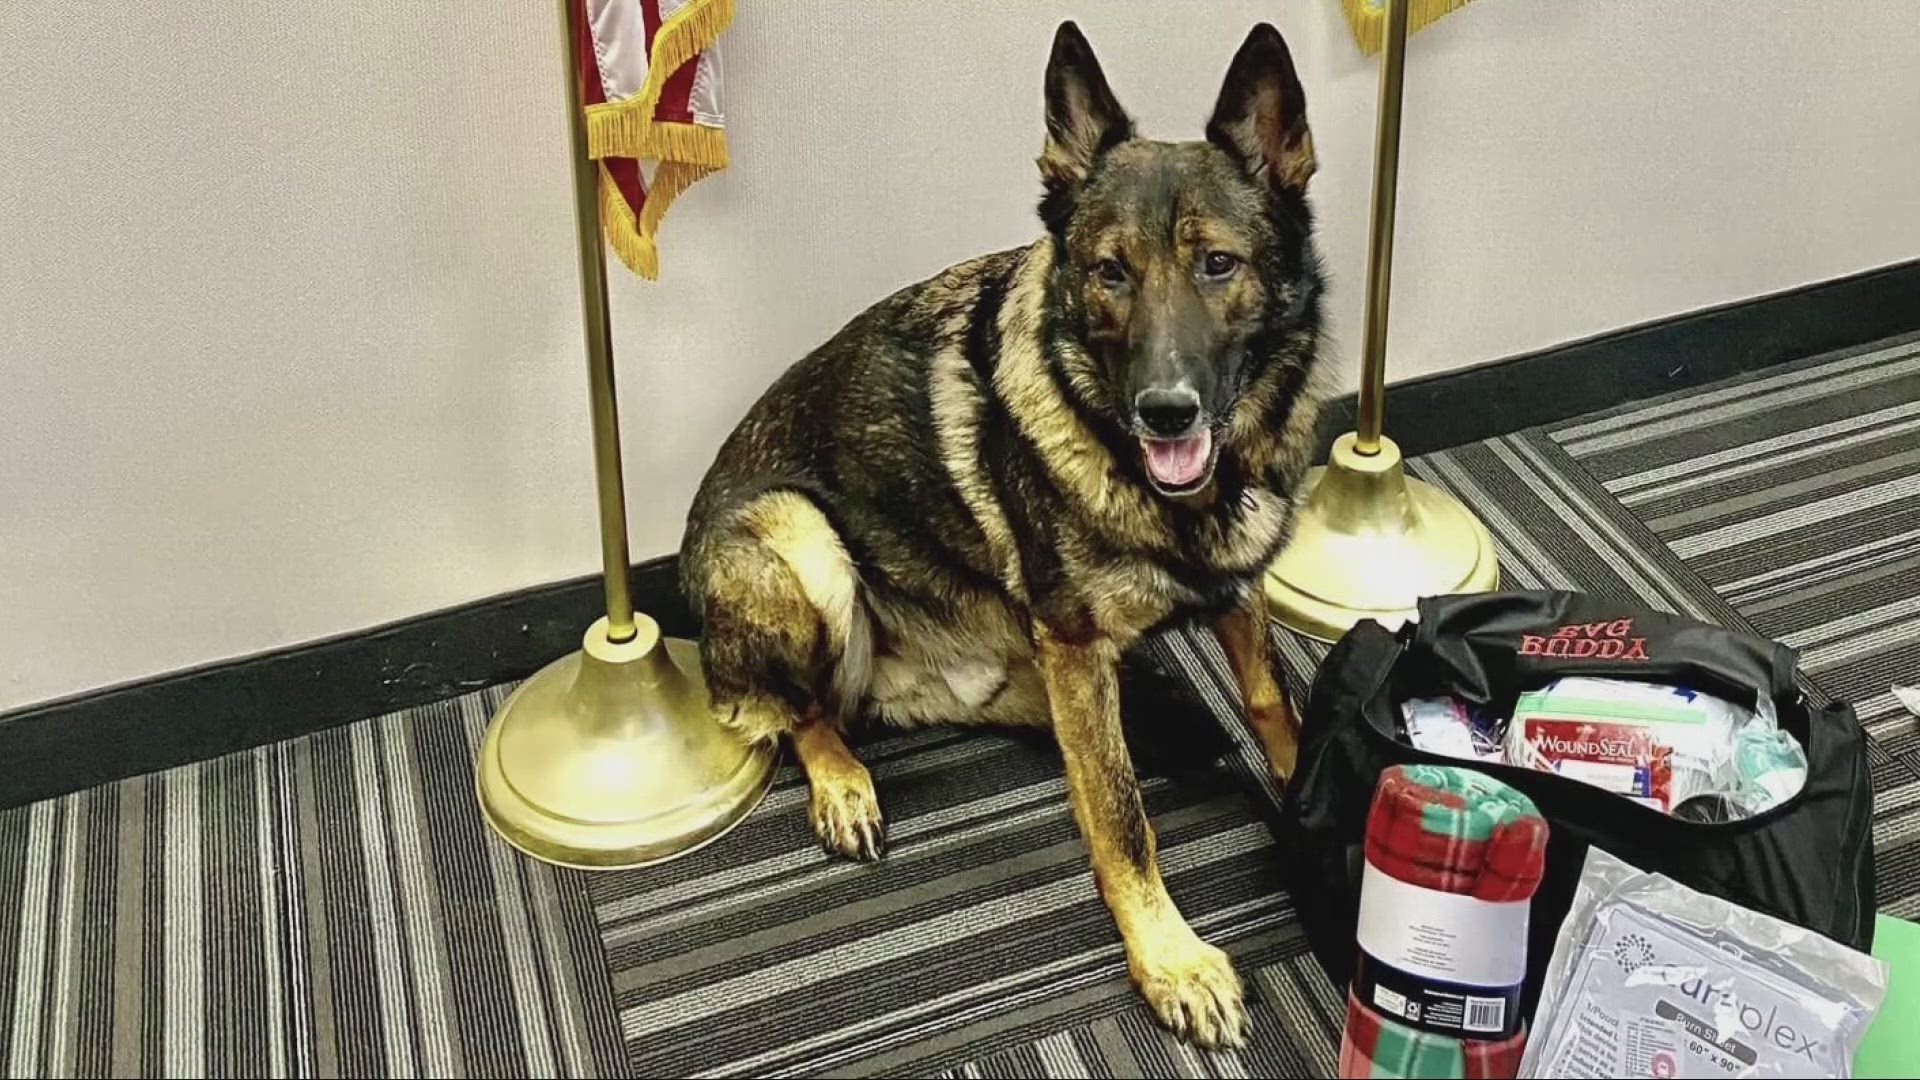 Ryan Kaetzel says turning in his beloved K-9 Bosco 'was the toughest thing he's ever had to do in his life.'